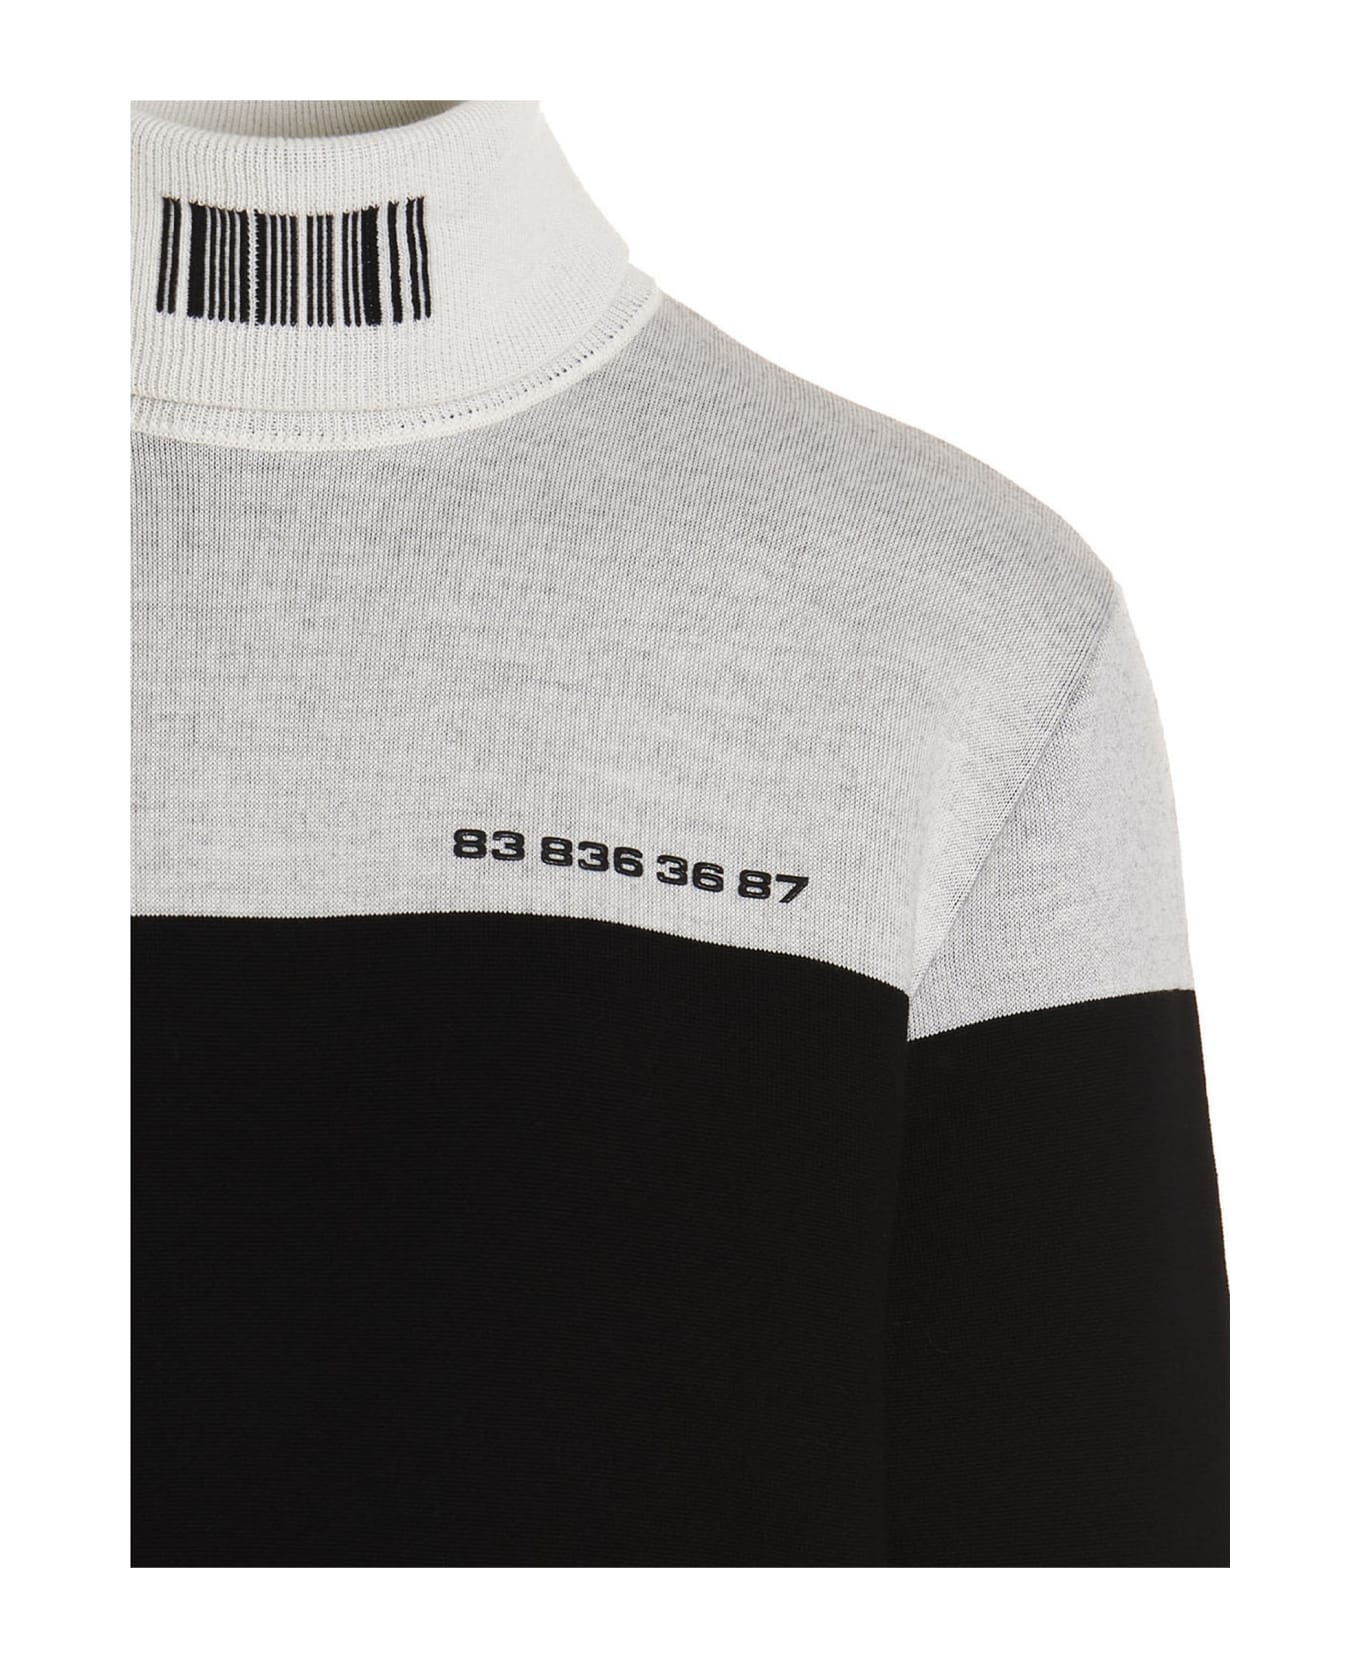 VTMNTS 'numbered Colorblock' Sweater - White Black